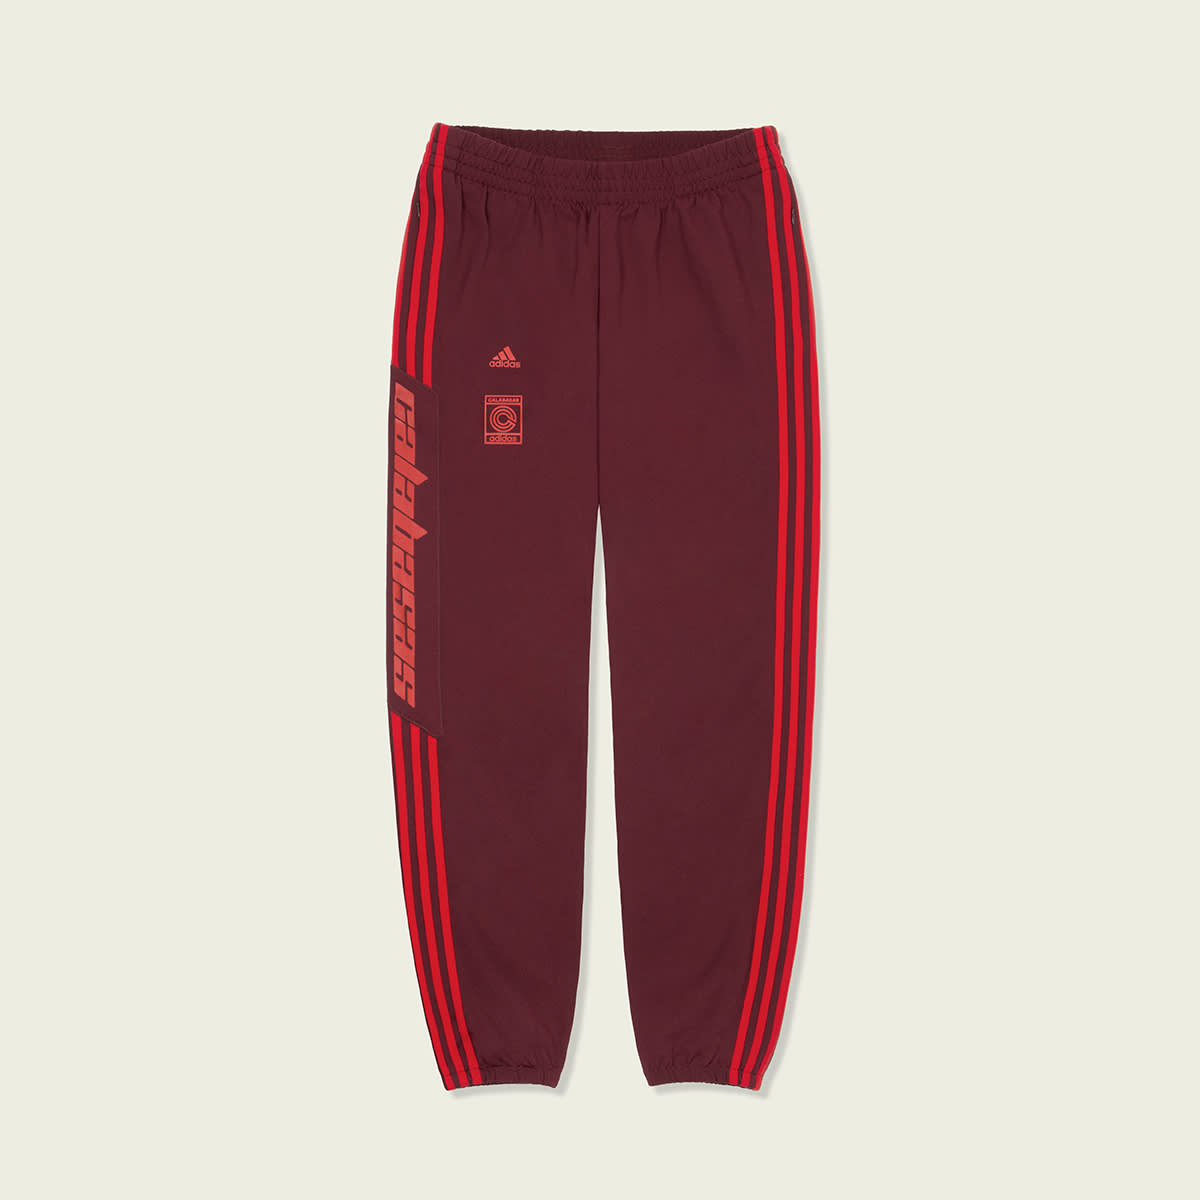 Yeezy Calabasas Track Pant - Register Now on END. Launches | END.